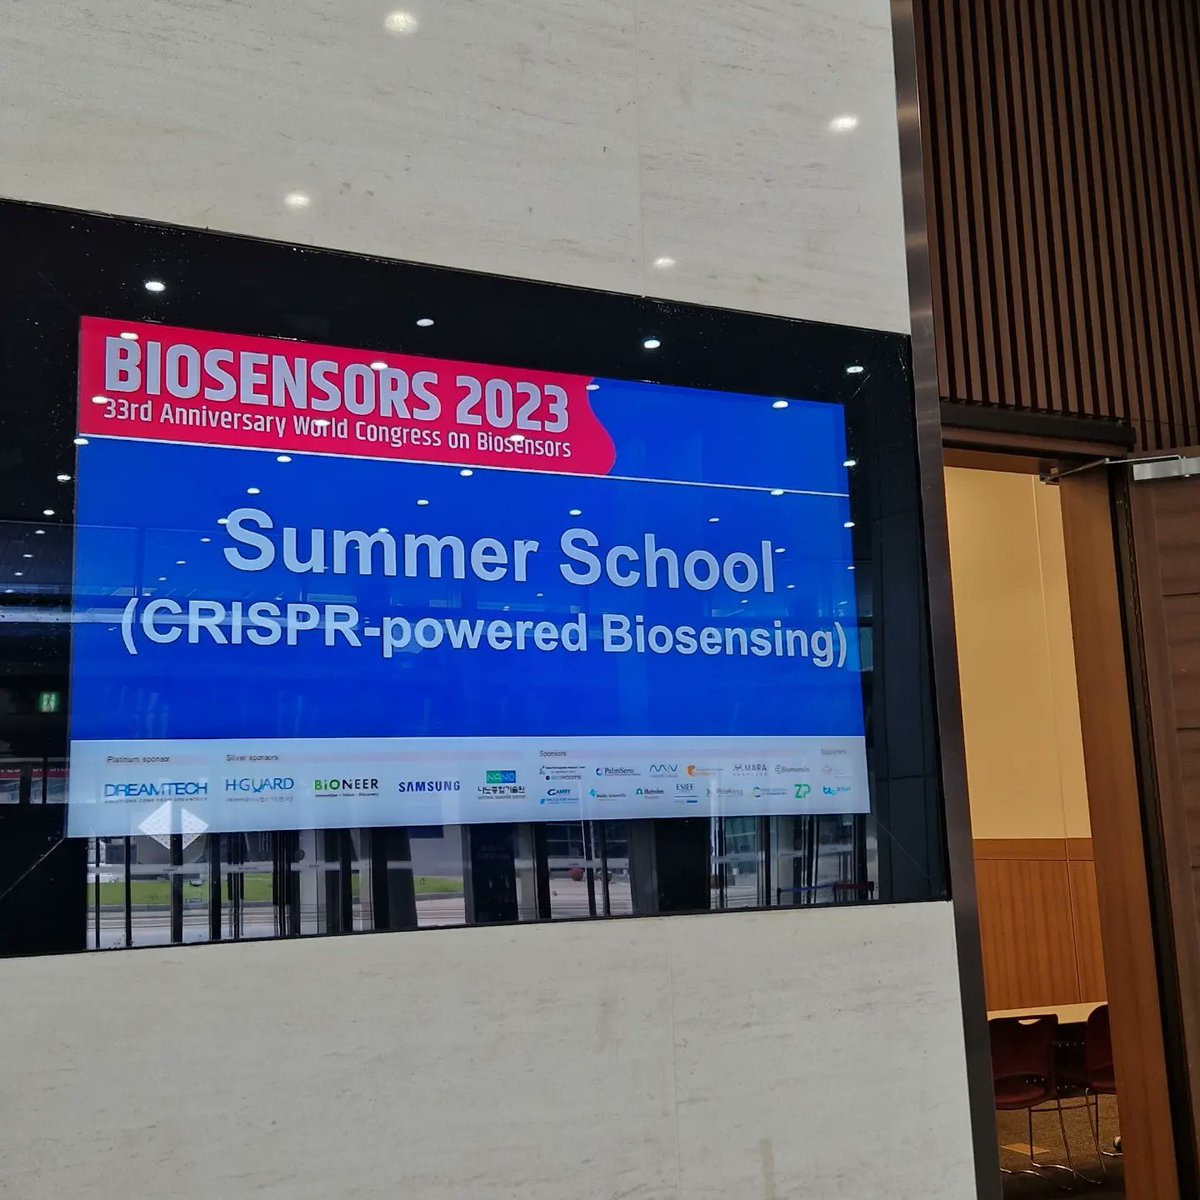 Two #SummerSchools ready to start at #biosensors2023 in #Busan #SouthKorea 
#CRISPRpoweredBiosensing and #MachineLearning and biosensing / #AI in #HealthCare
@CanDincer83 #FiratGuder